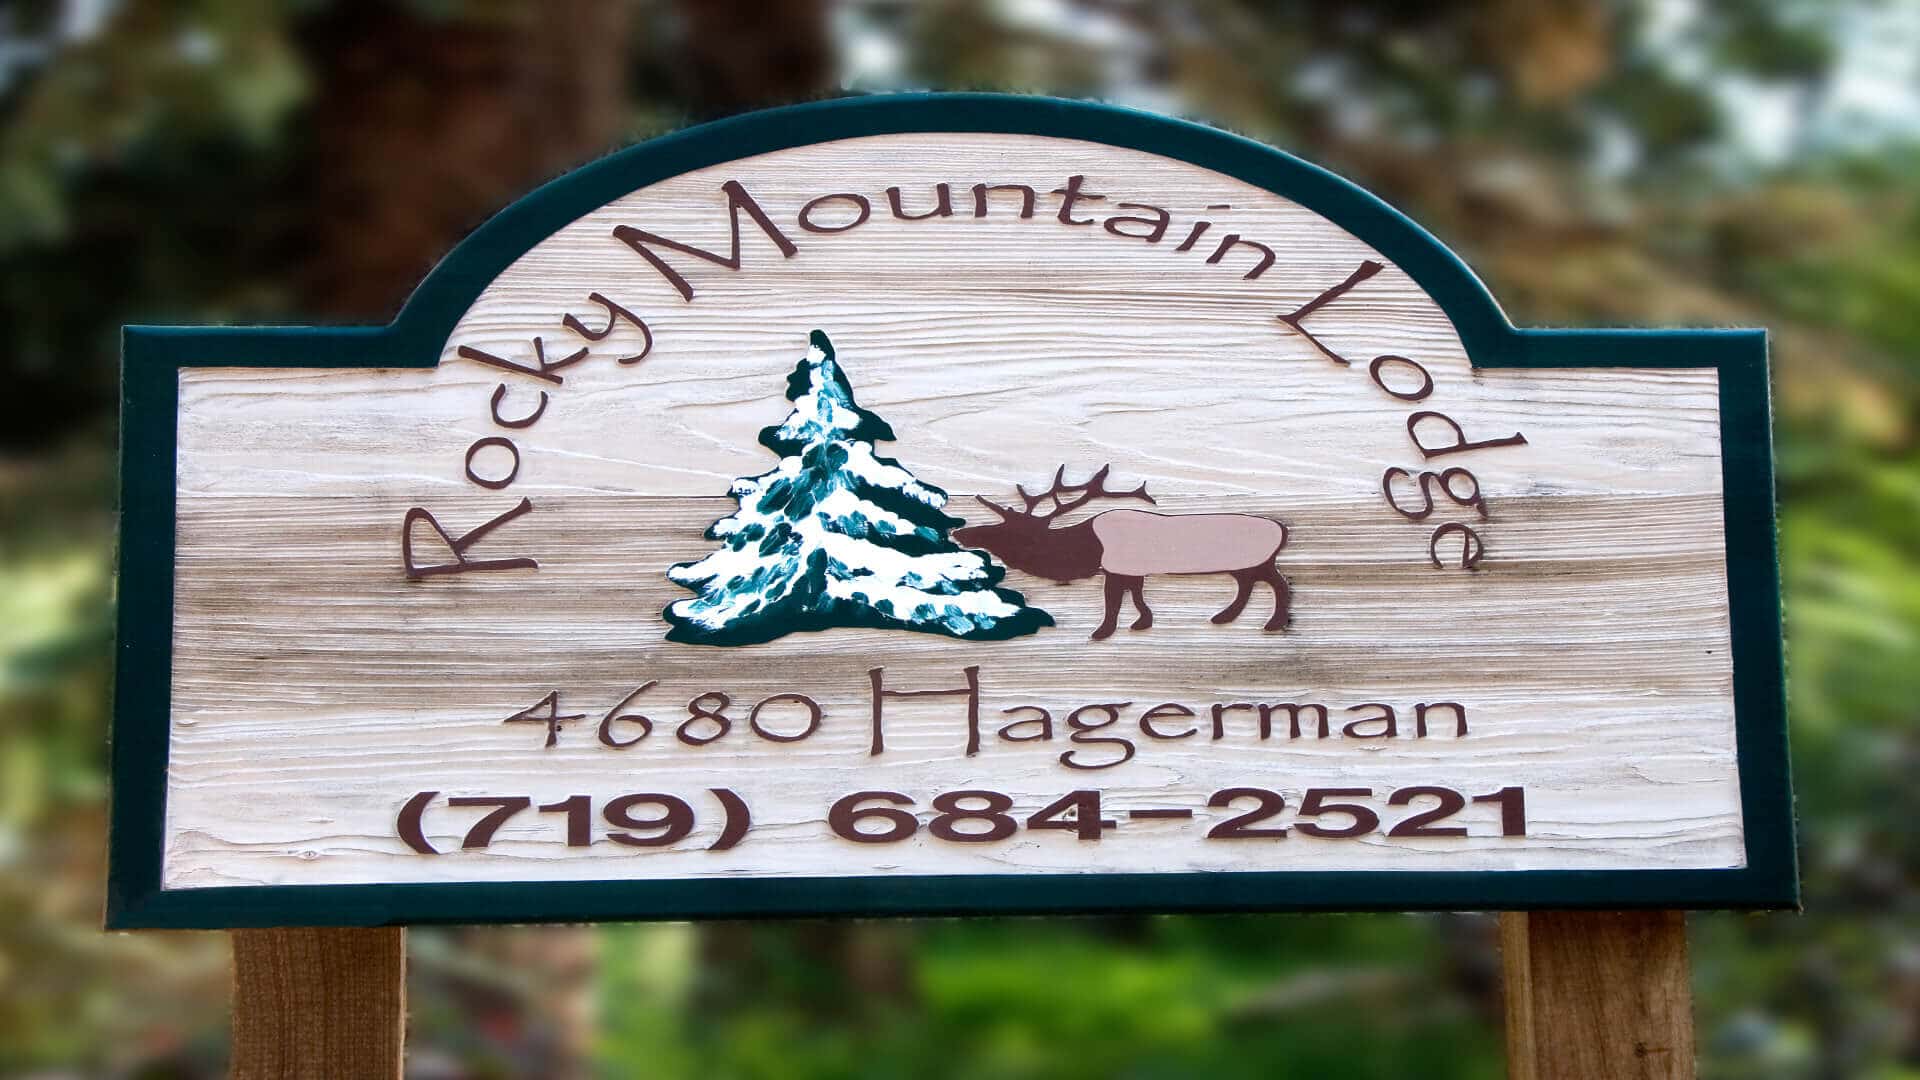 rocky mountain lodge sign